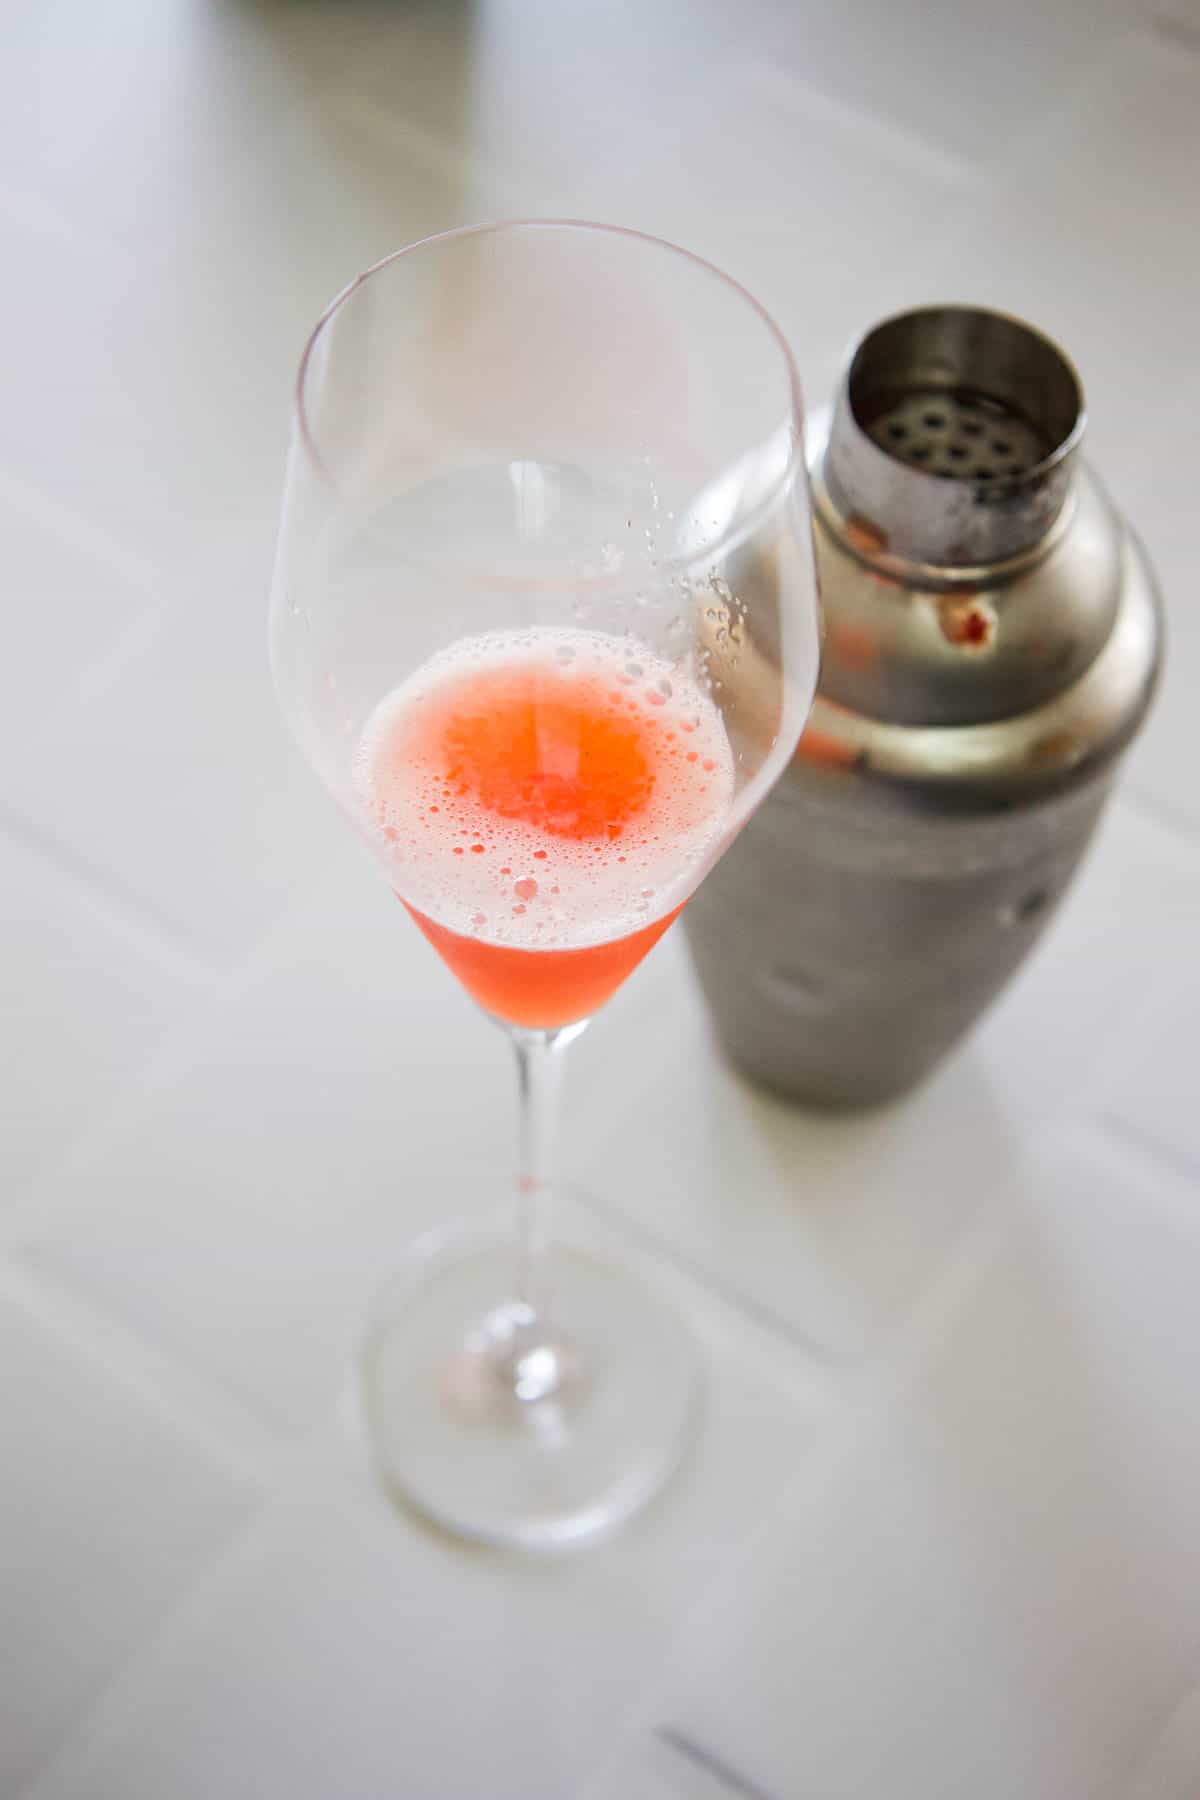 A champagne flute with a mix of strawberries, lemon and St Germain in a champagne flute.